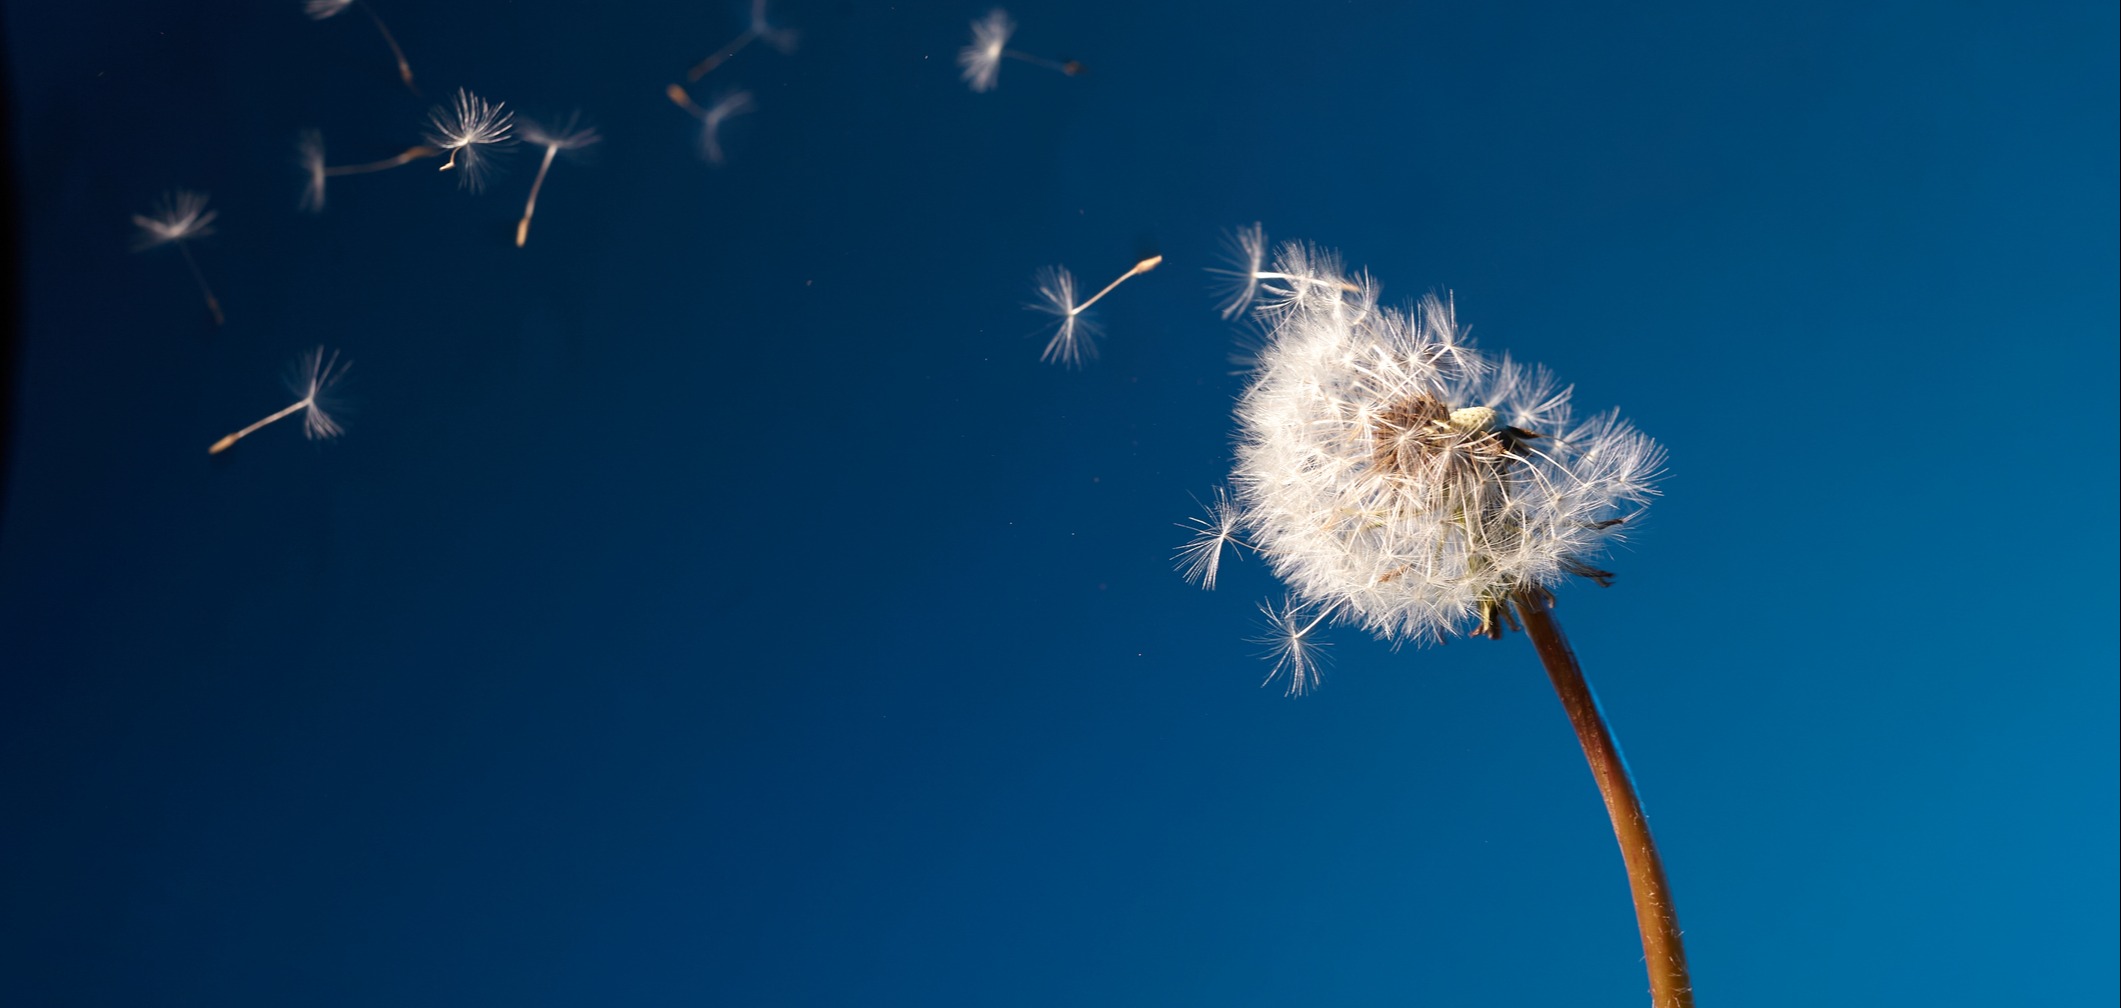 Dandelion with seeds blowing away in the wind in blue sky